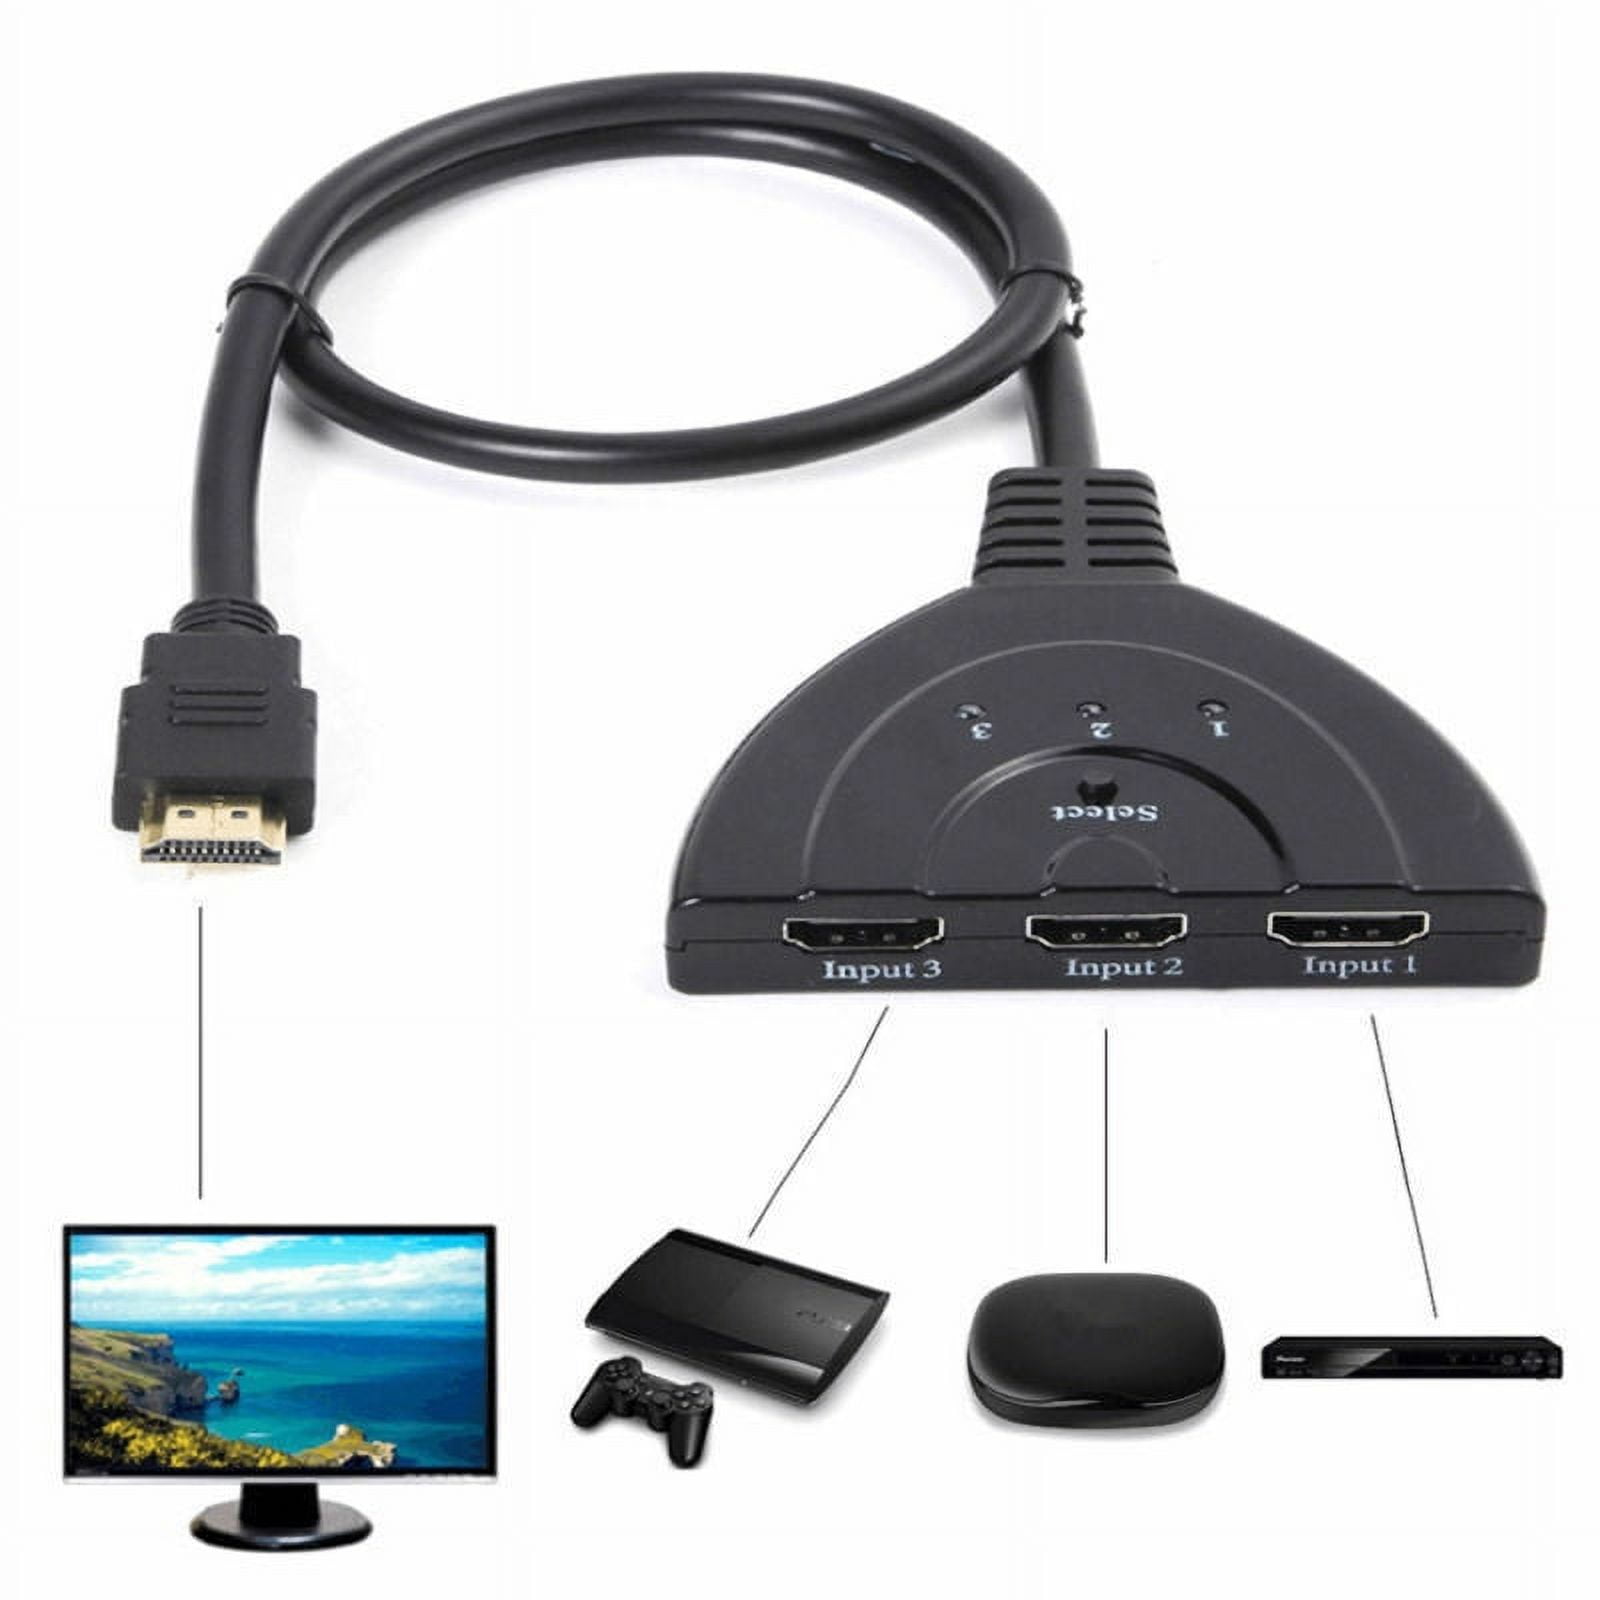 4k 2k 3x1 Hdmi Cable Splitter Hd 1080p 4096 3840 Video Switcher Adapter 3  Input Port Usb Hub For Xbox Dvd Hdtv Pc Laptop Tv - Audio & Video Cables -  AliExpress